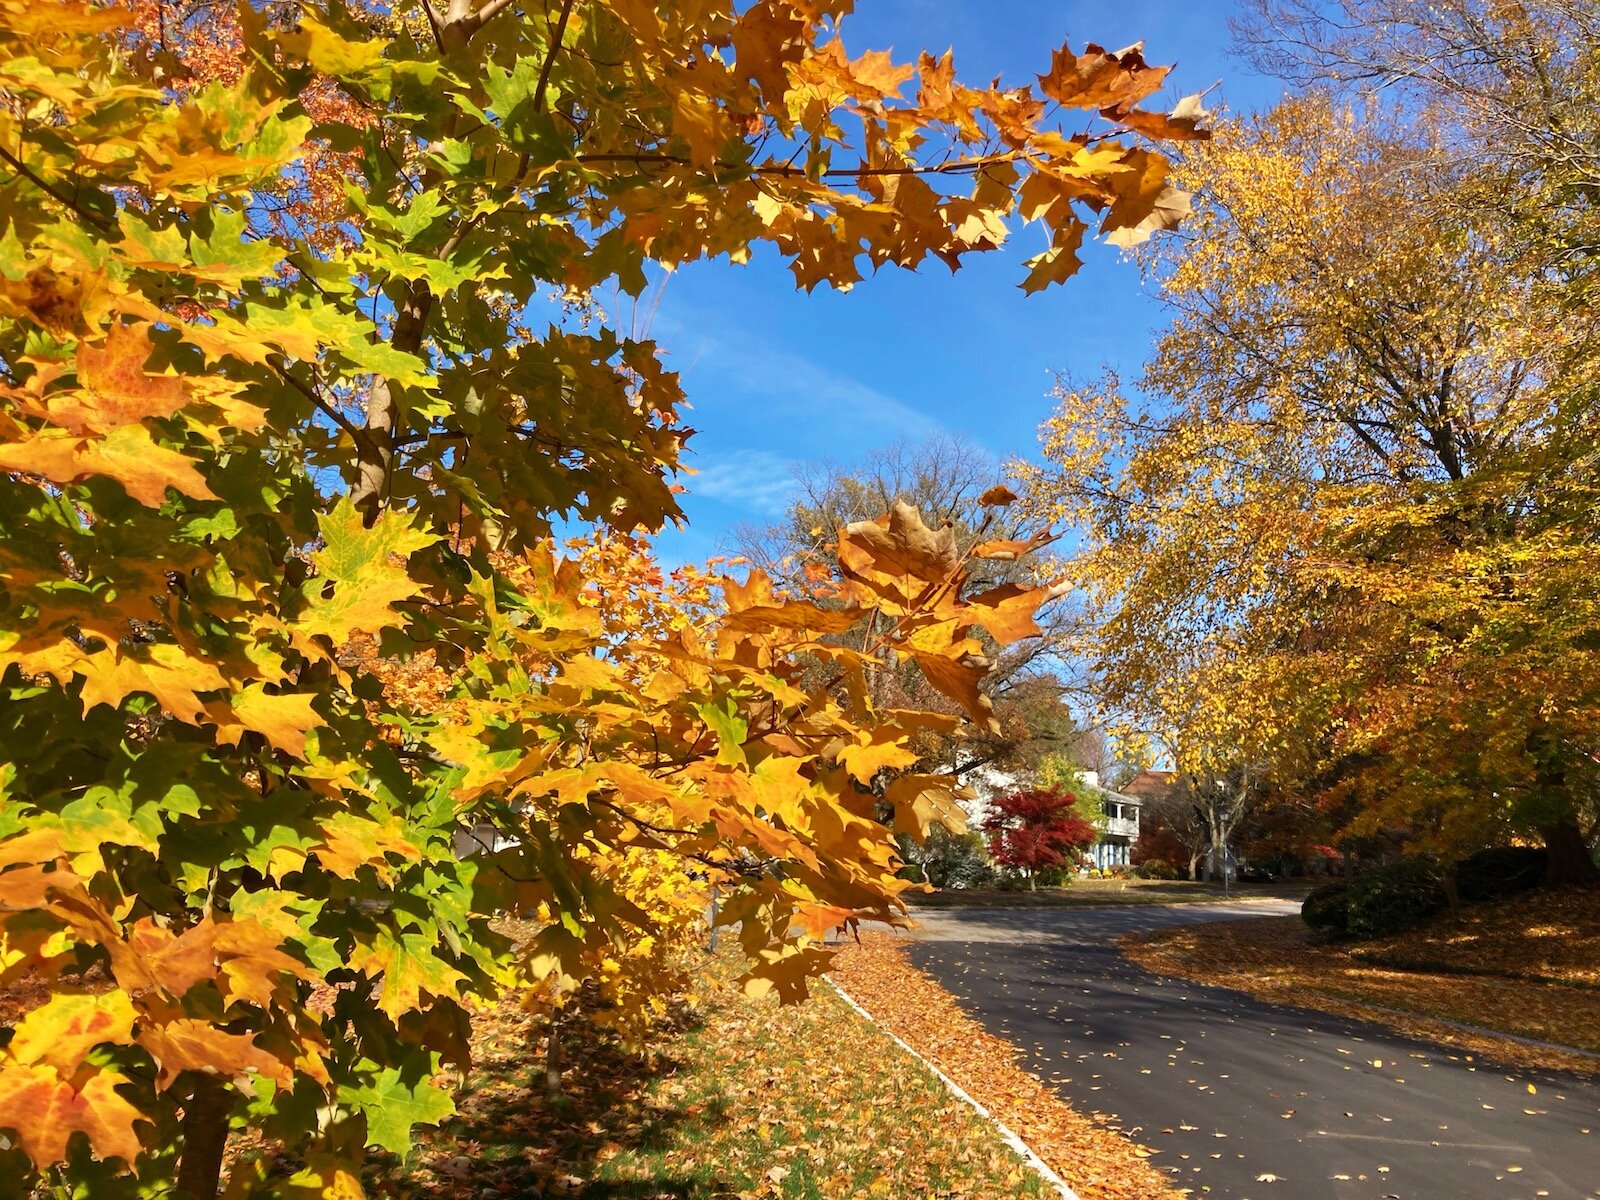 Native trees create a colorful canopy of reds, oranges, yellows, and purples in Historic Southwood Park each fall.